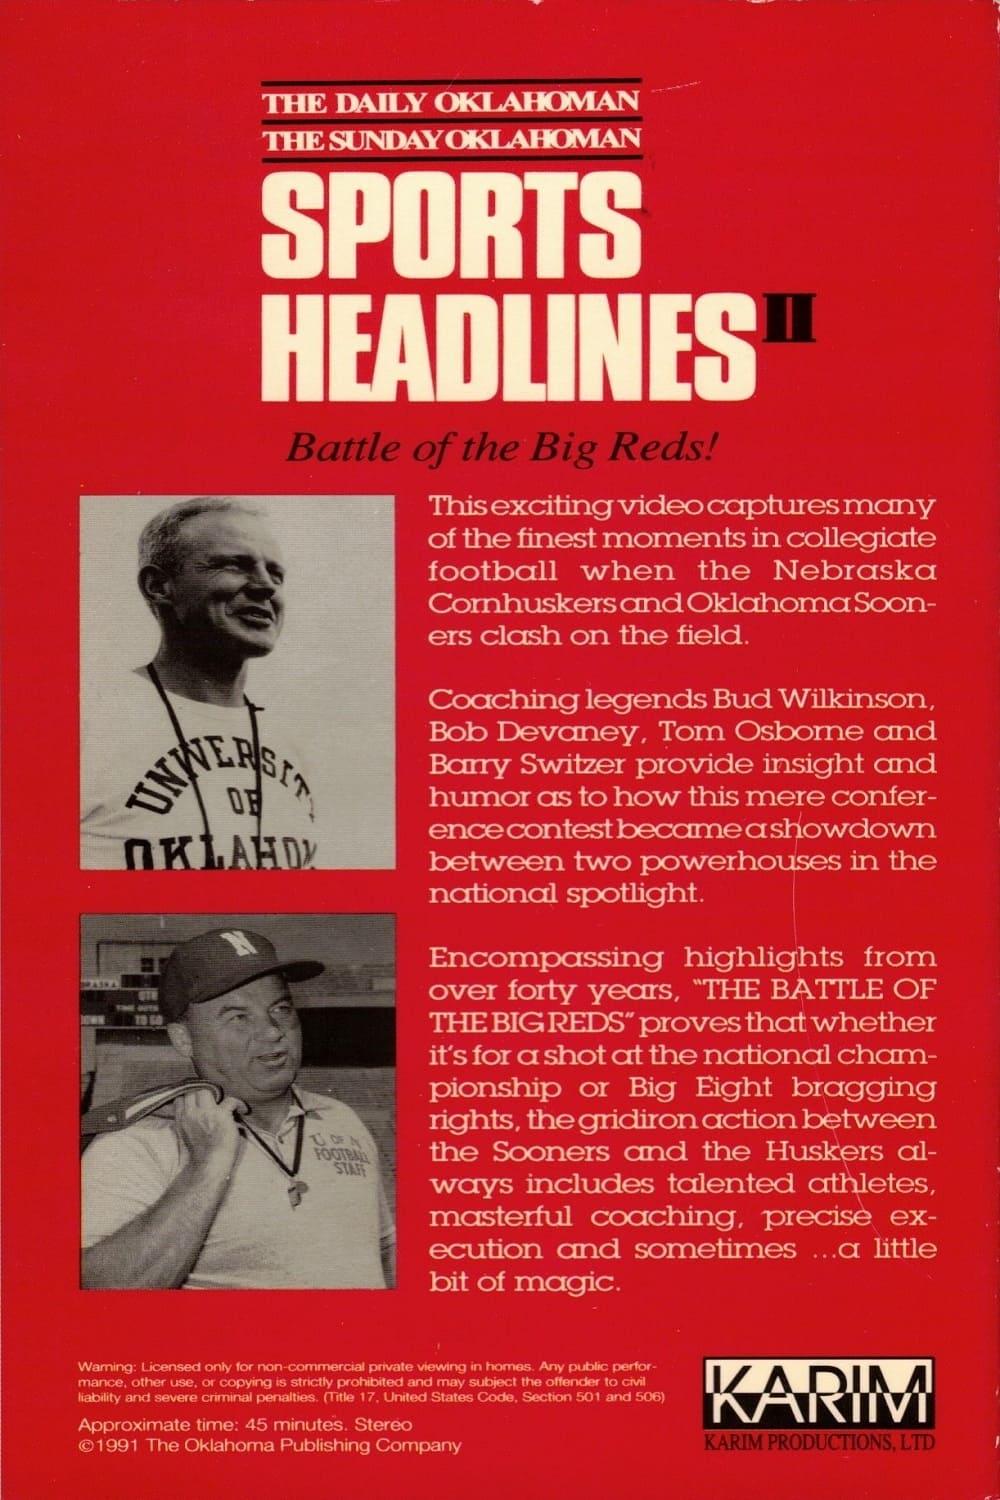 Sports Headlines II: Battle of the Big Reds poster